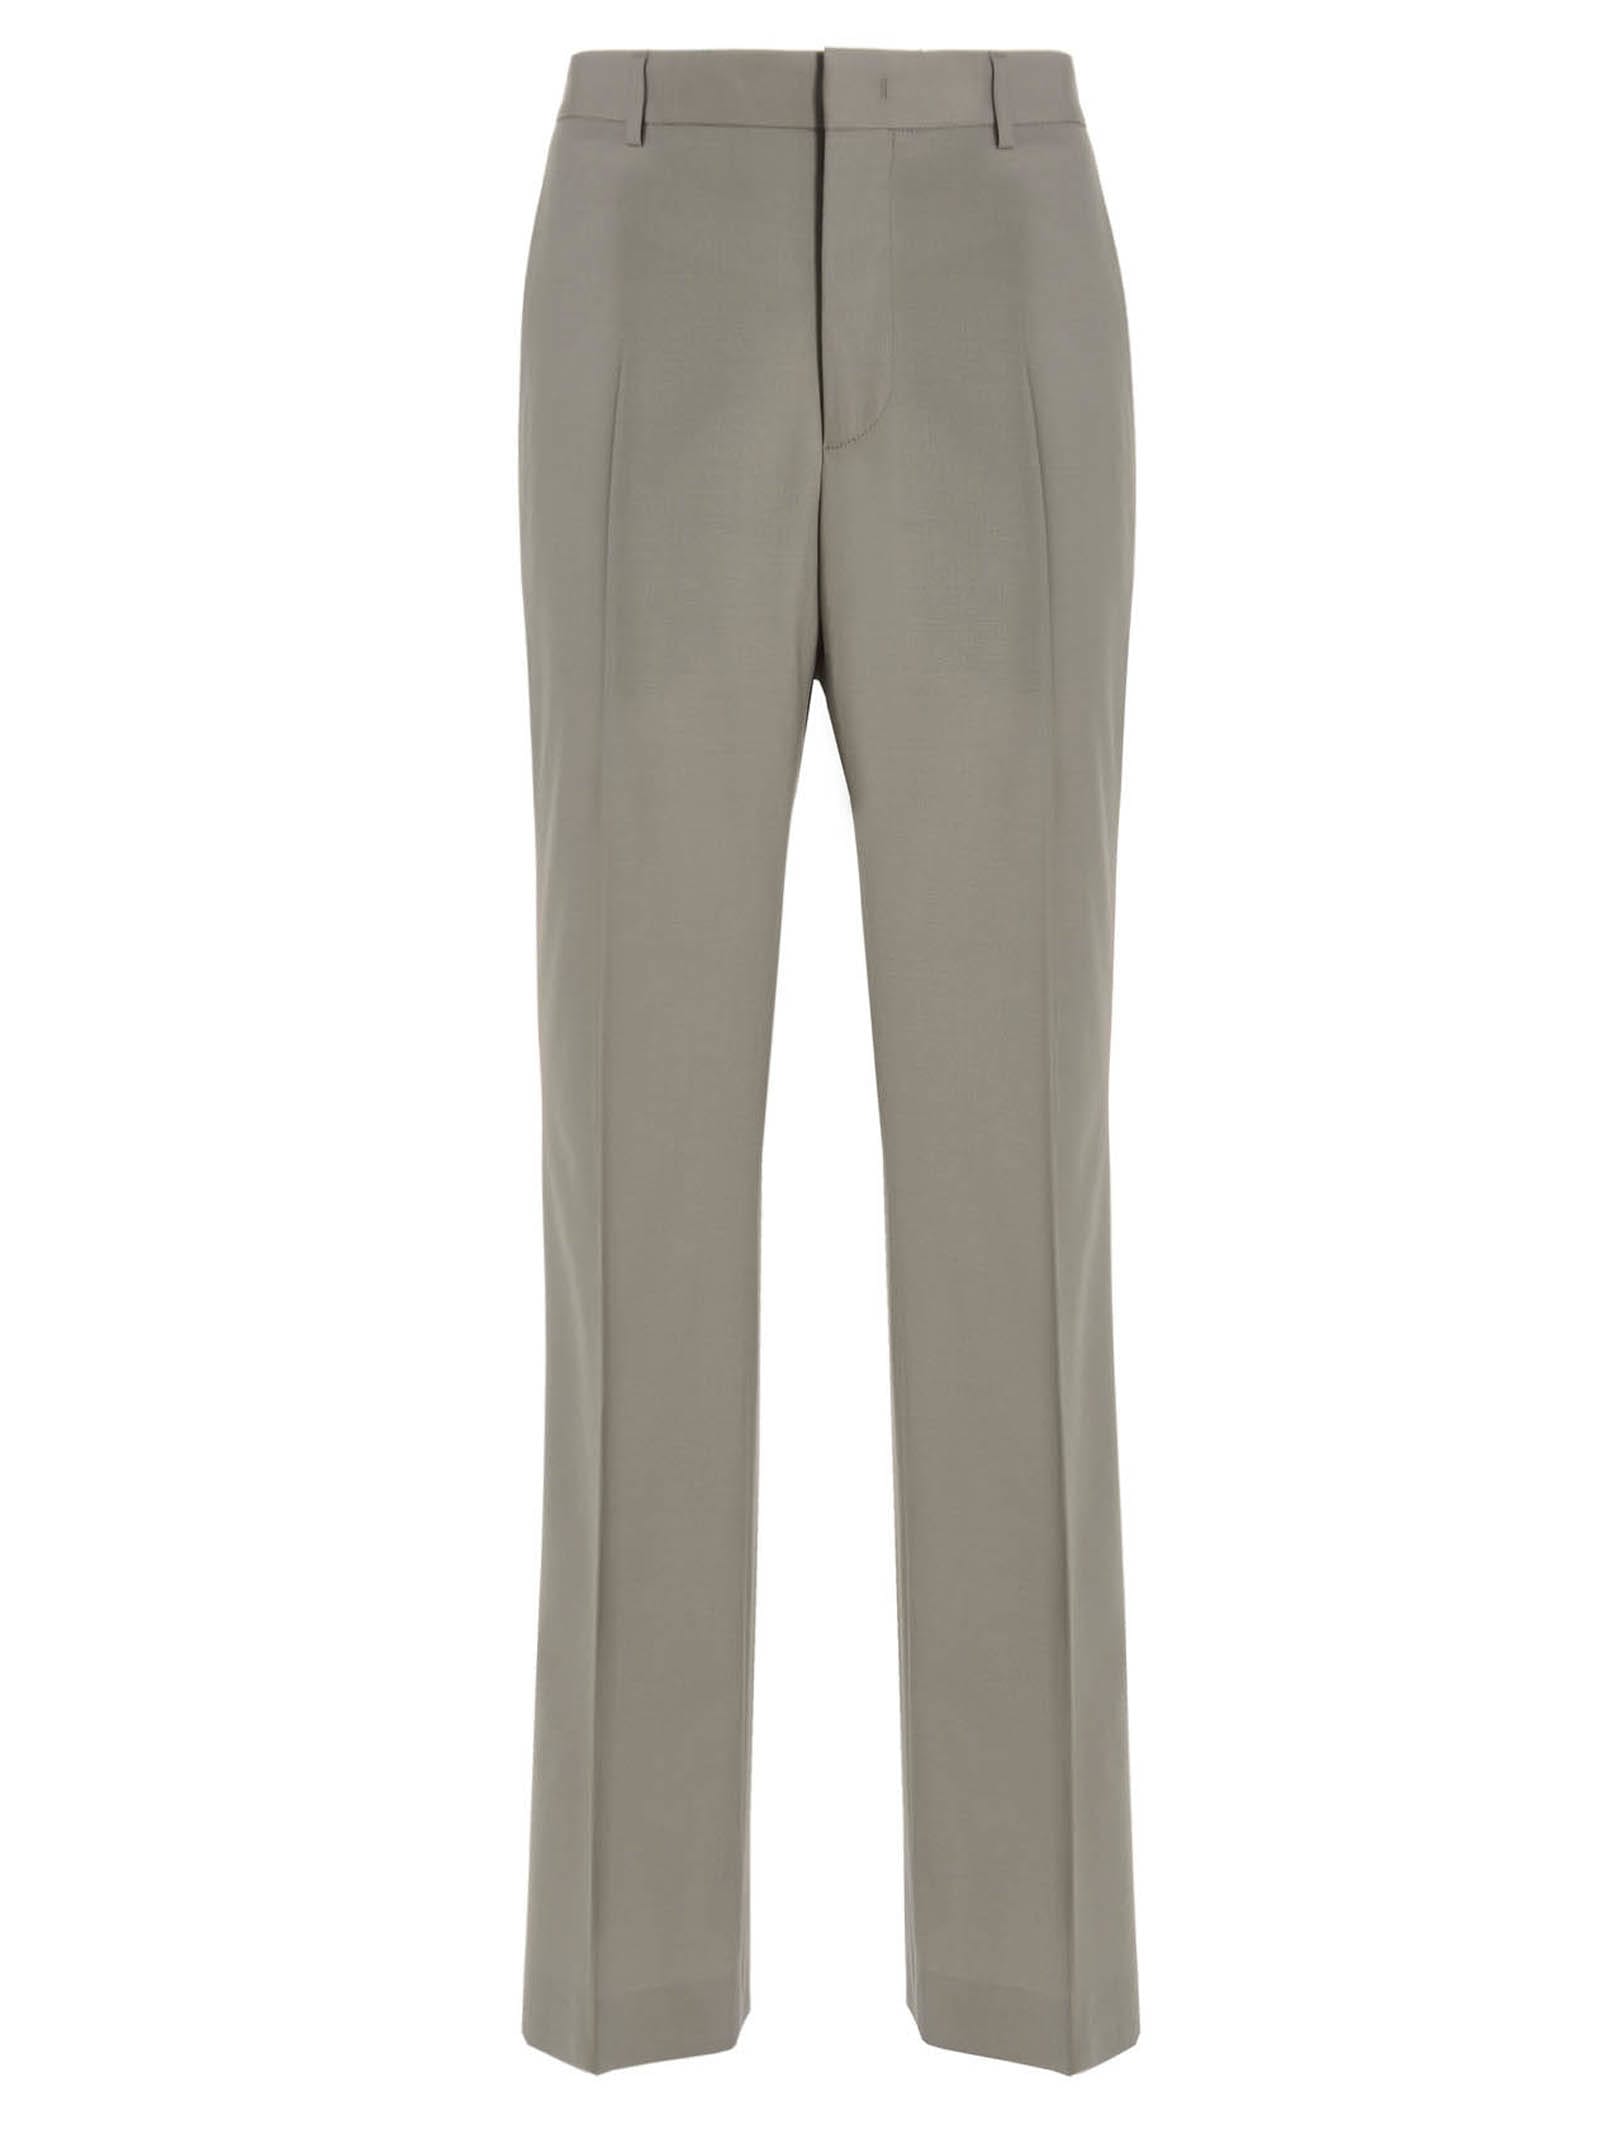 FOURTWOFOUR ON FAIRFAX VIRGIN WOOL trousers